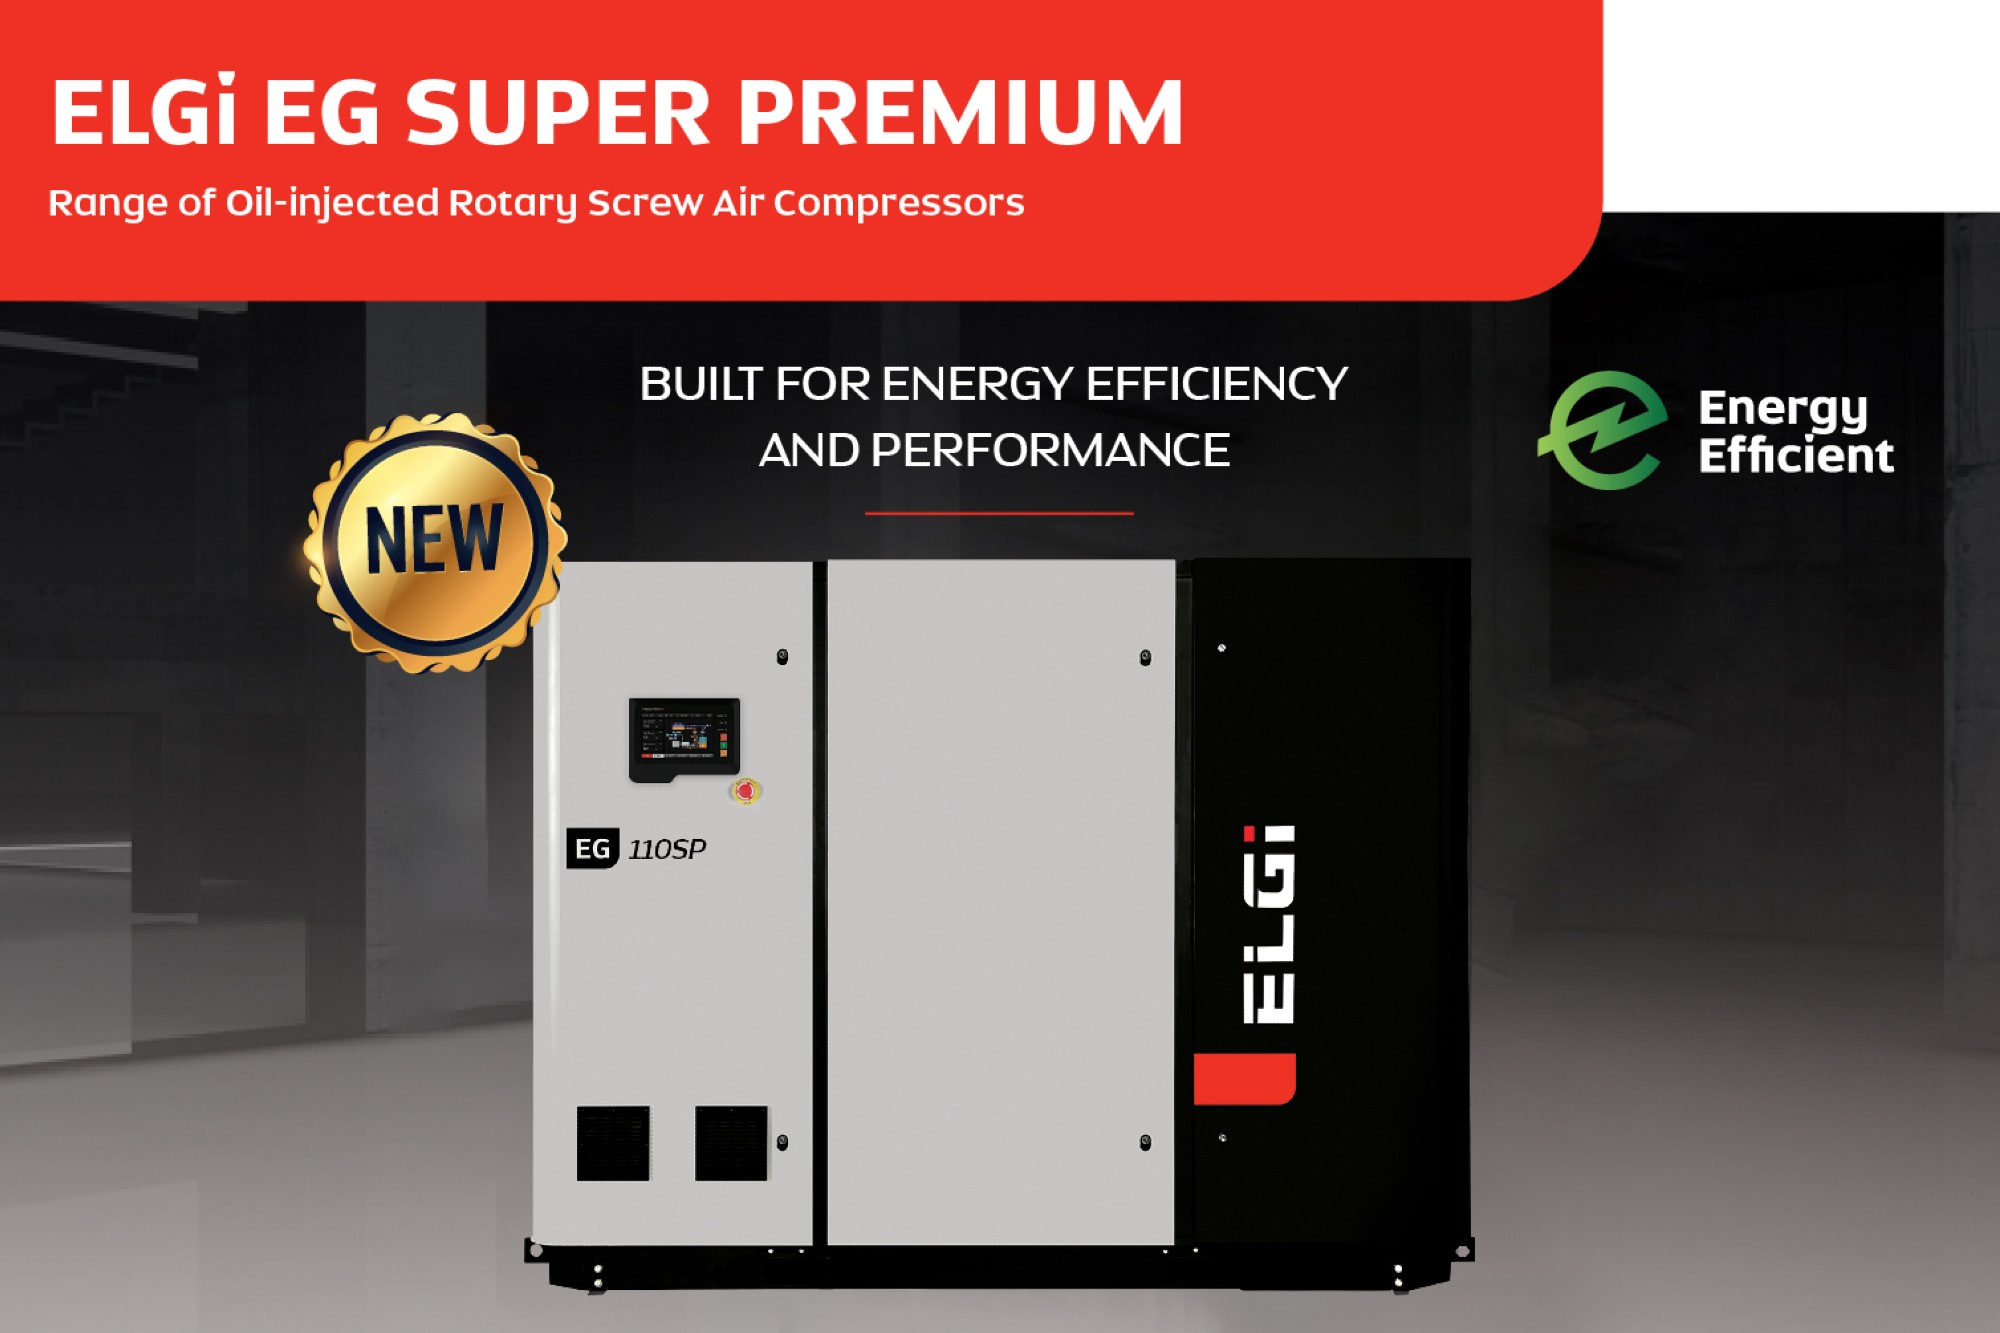 ElGi introduces the EG SP unit to transform oil-lubricated screw air compressors